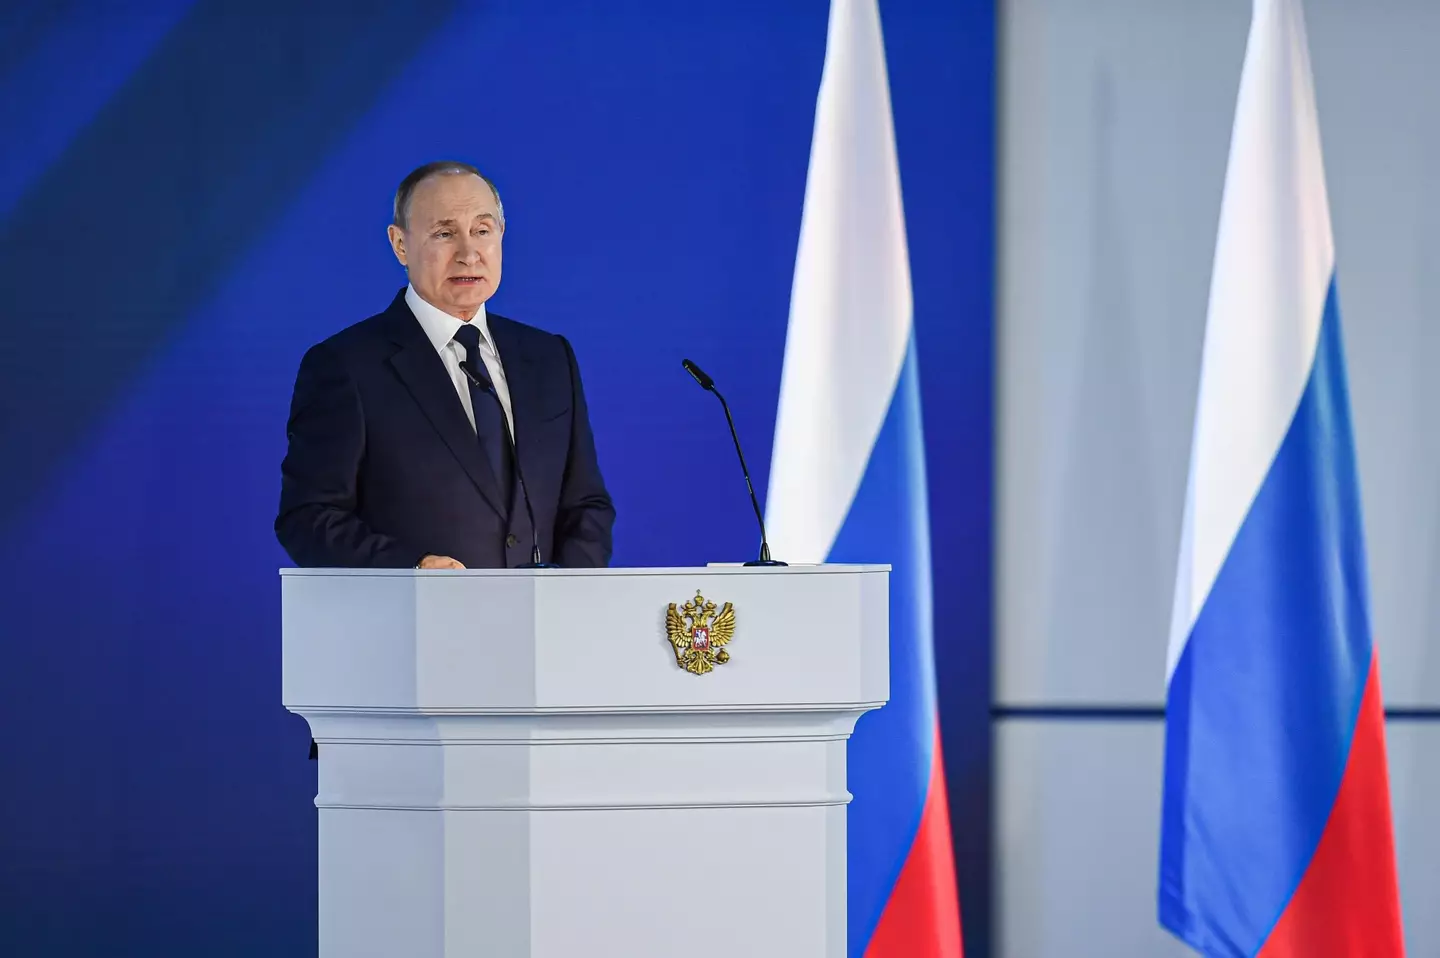 Putin is set to attend a ceremony at the Kremlin to mark the incorporation of the regions.